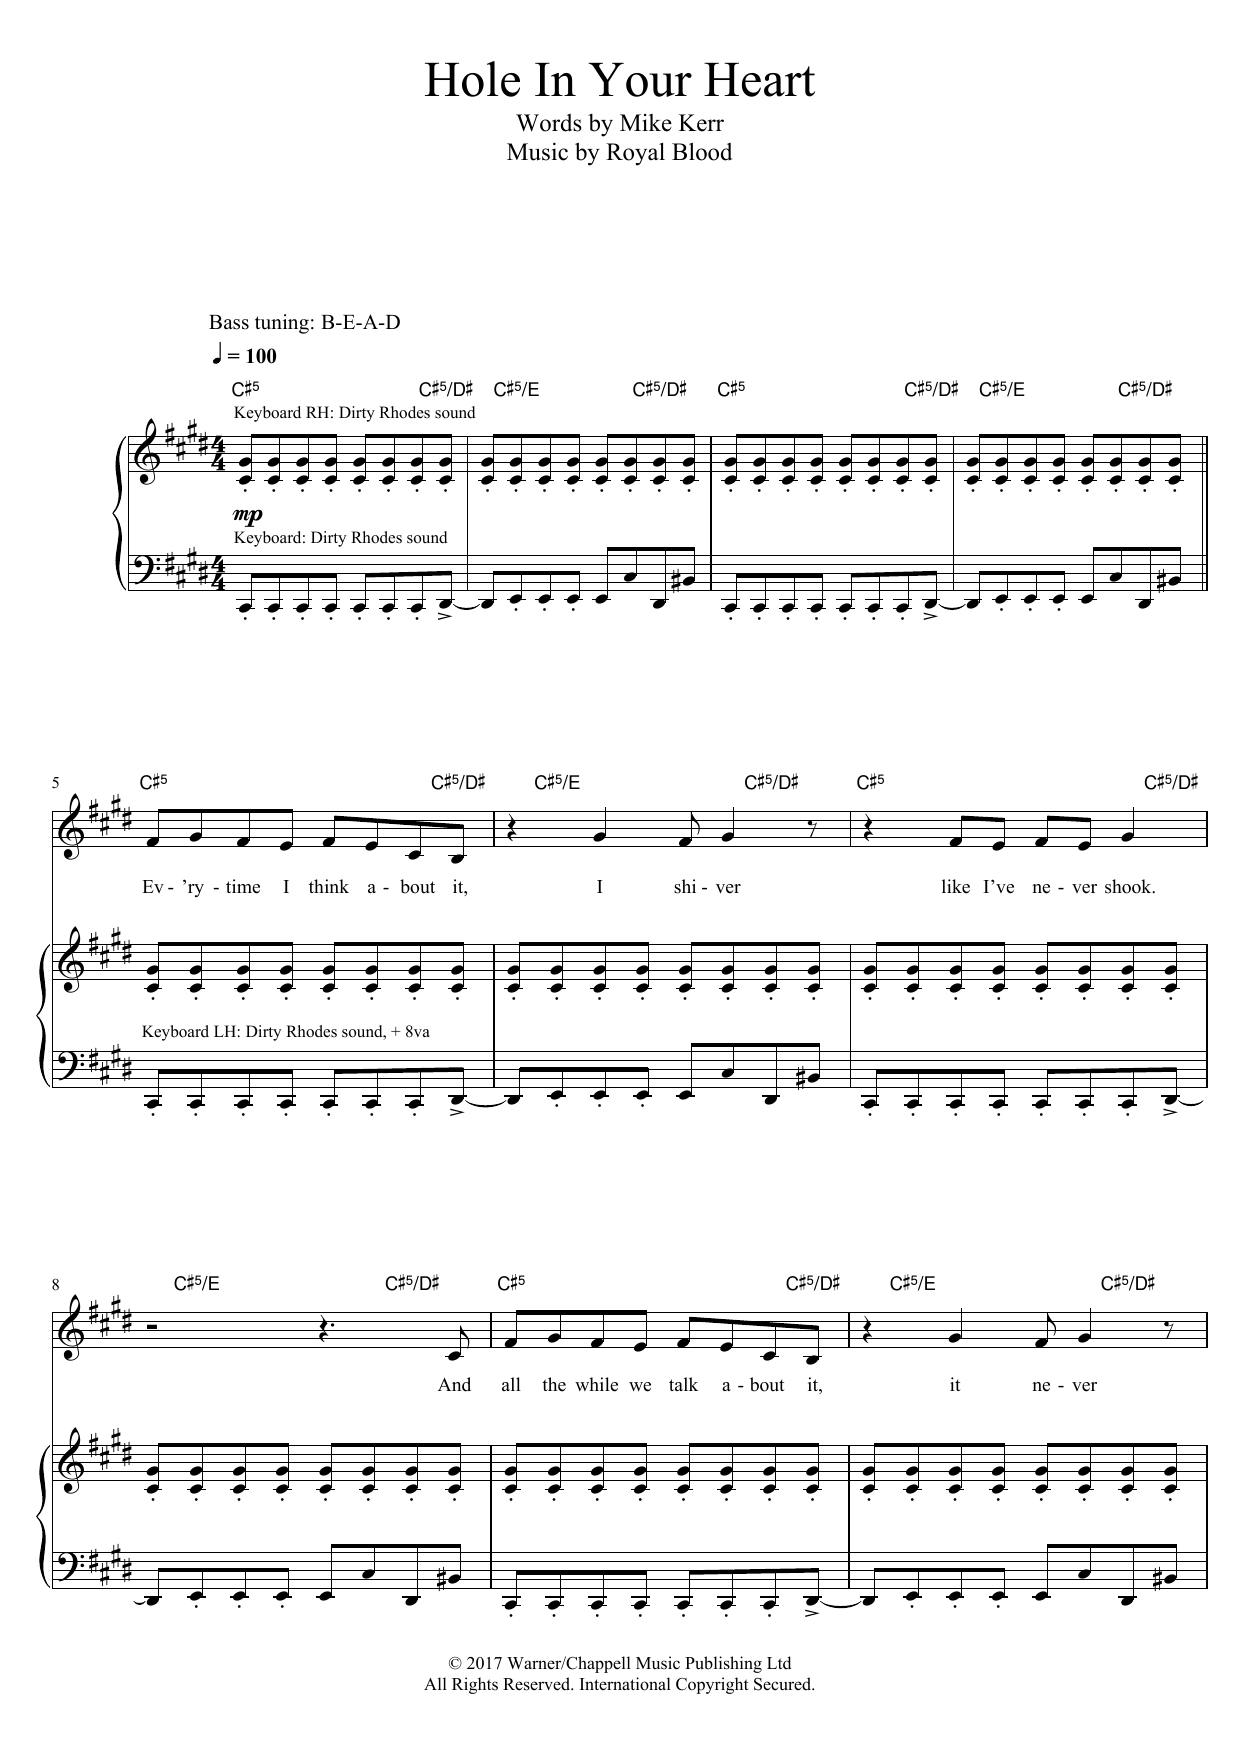 Download Royal Blood Hole In Your Heart Sheet Music